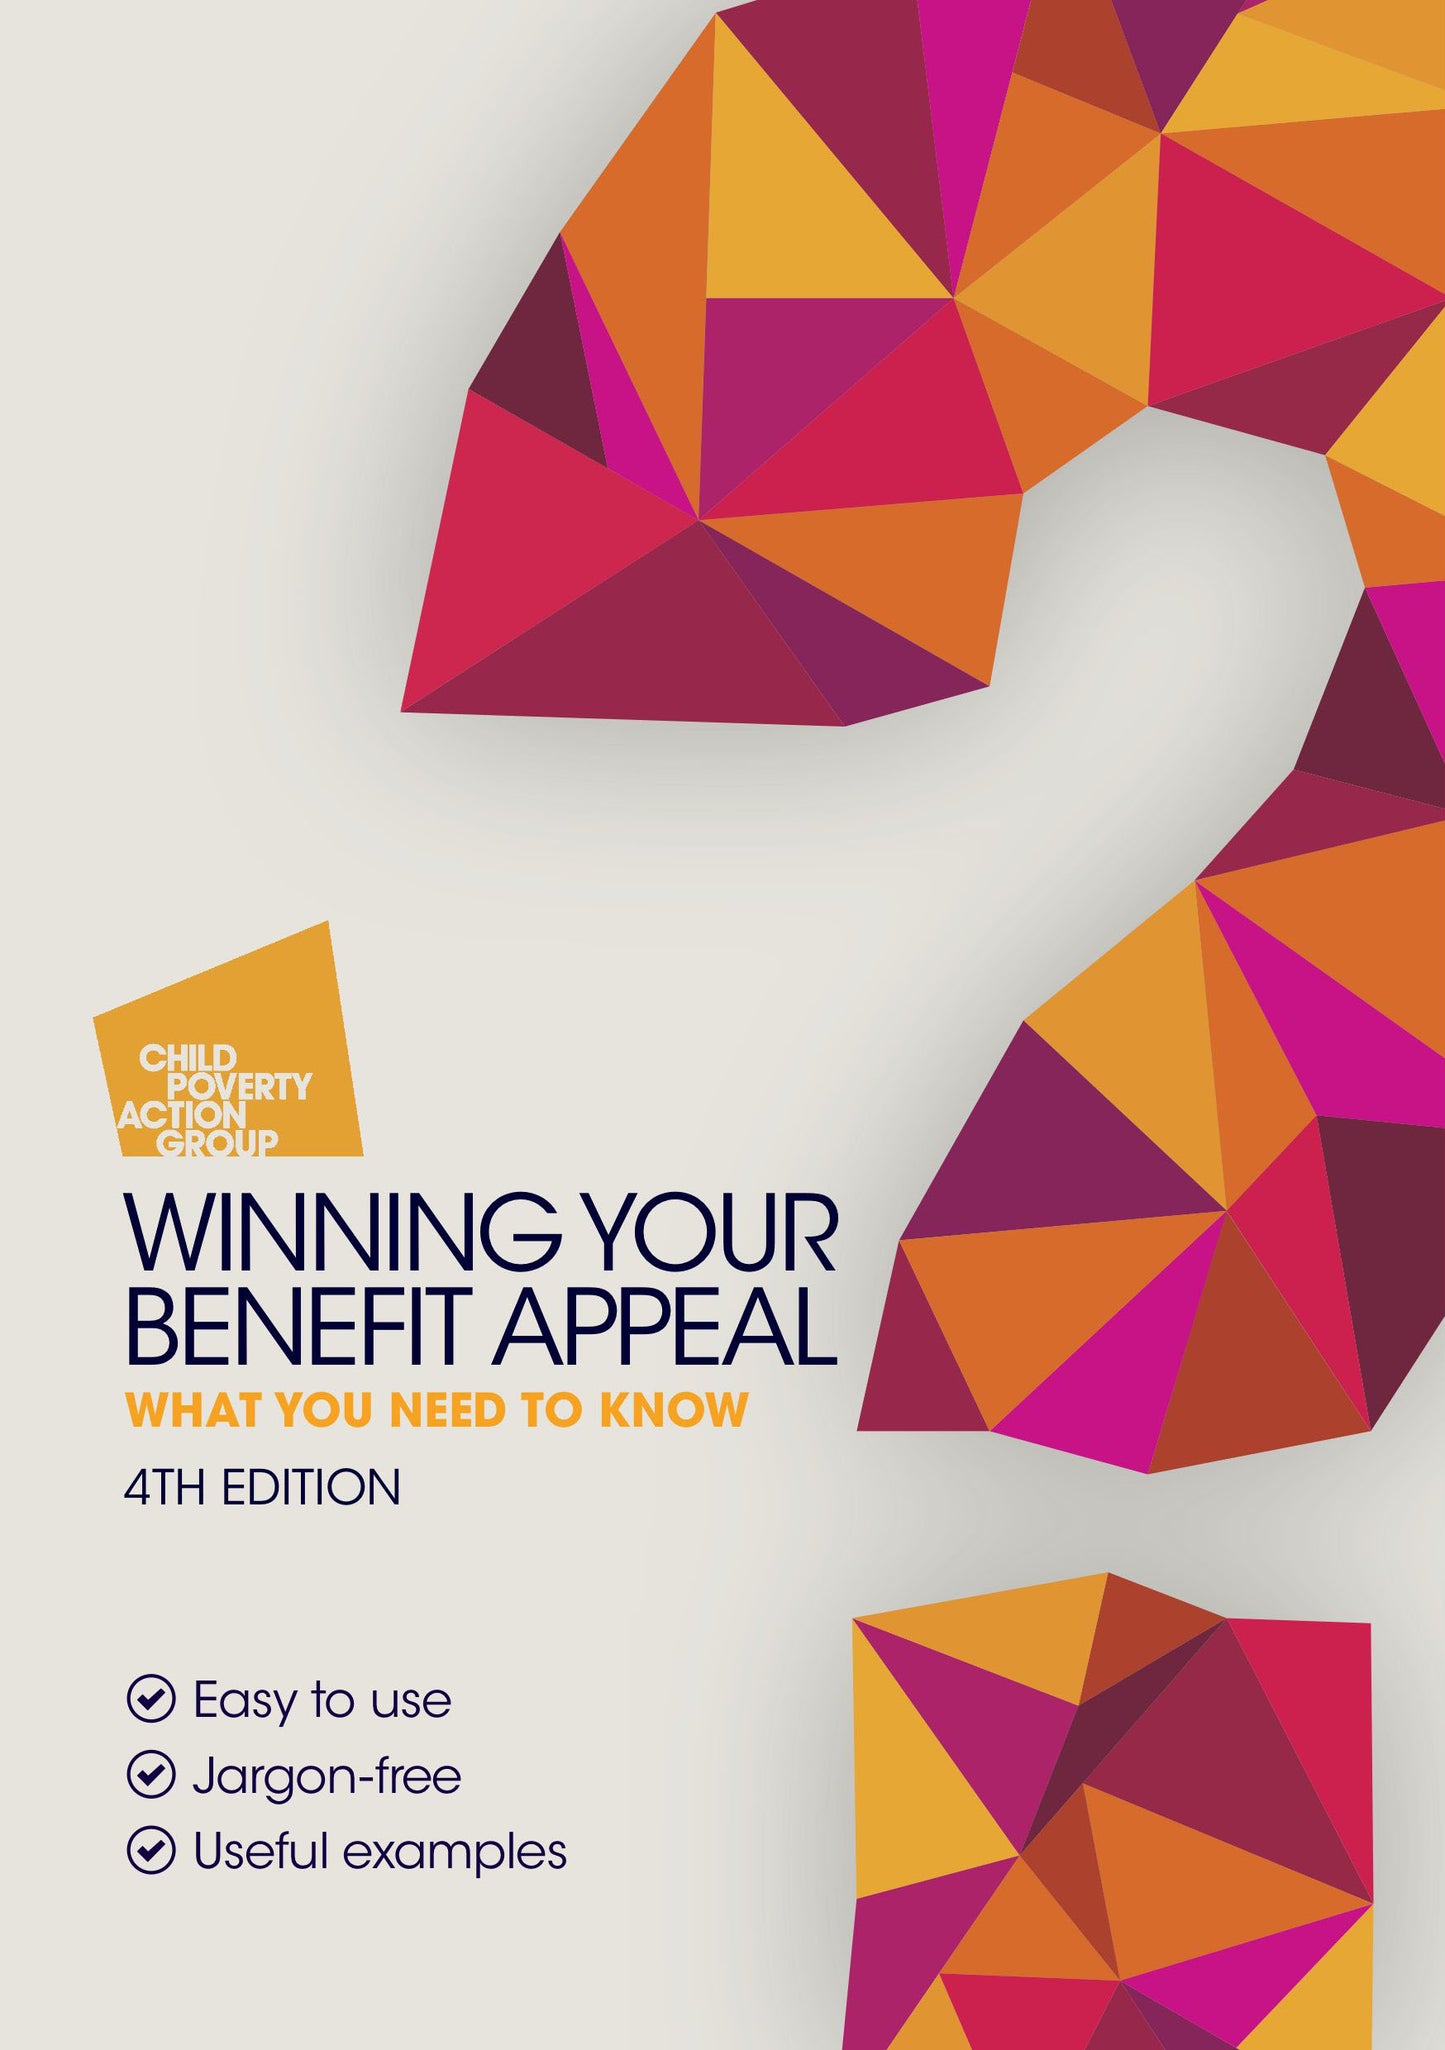 Winning Your Benefit Appeal: what you need to know